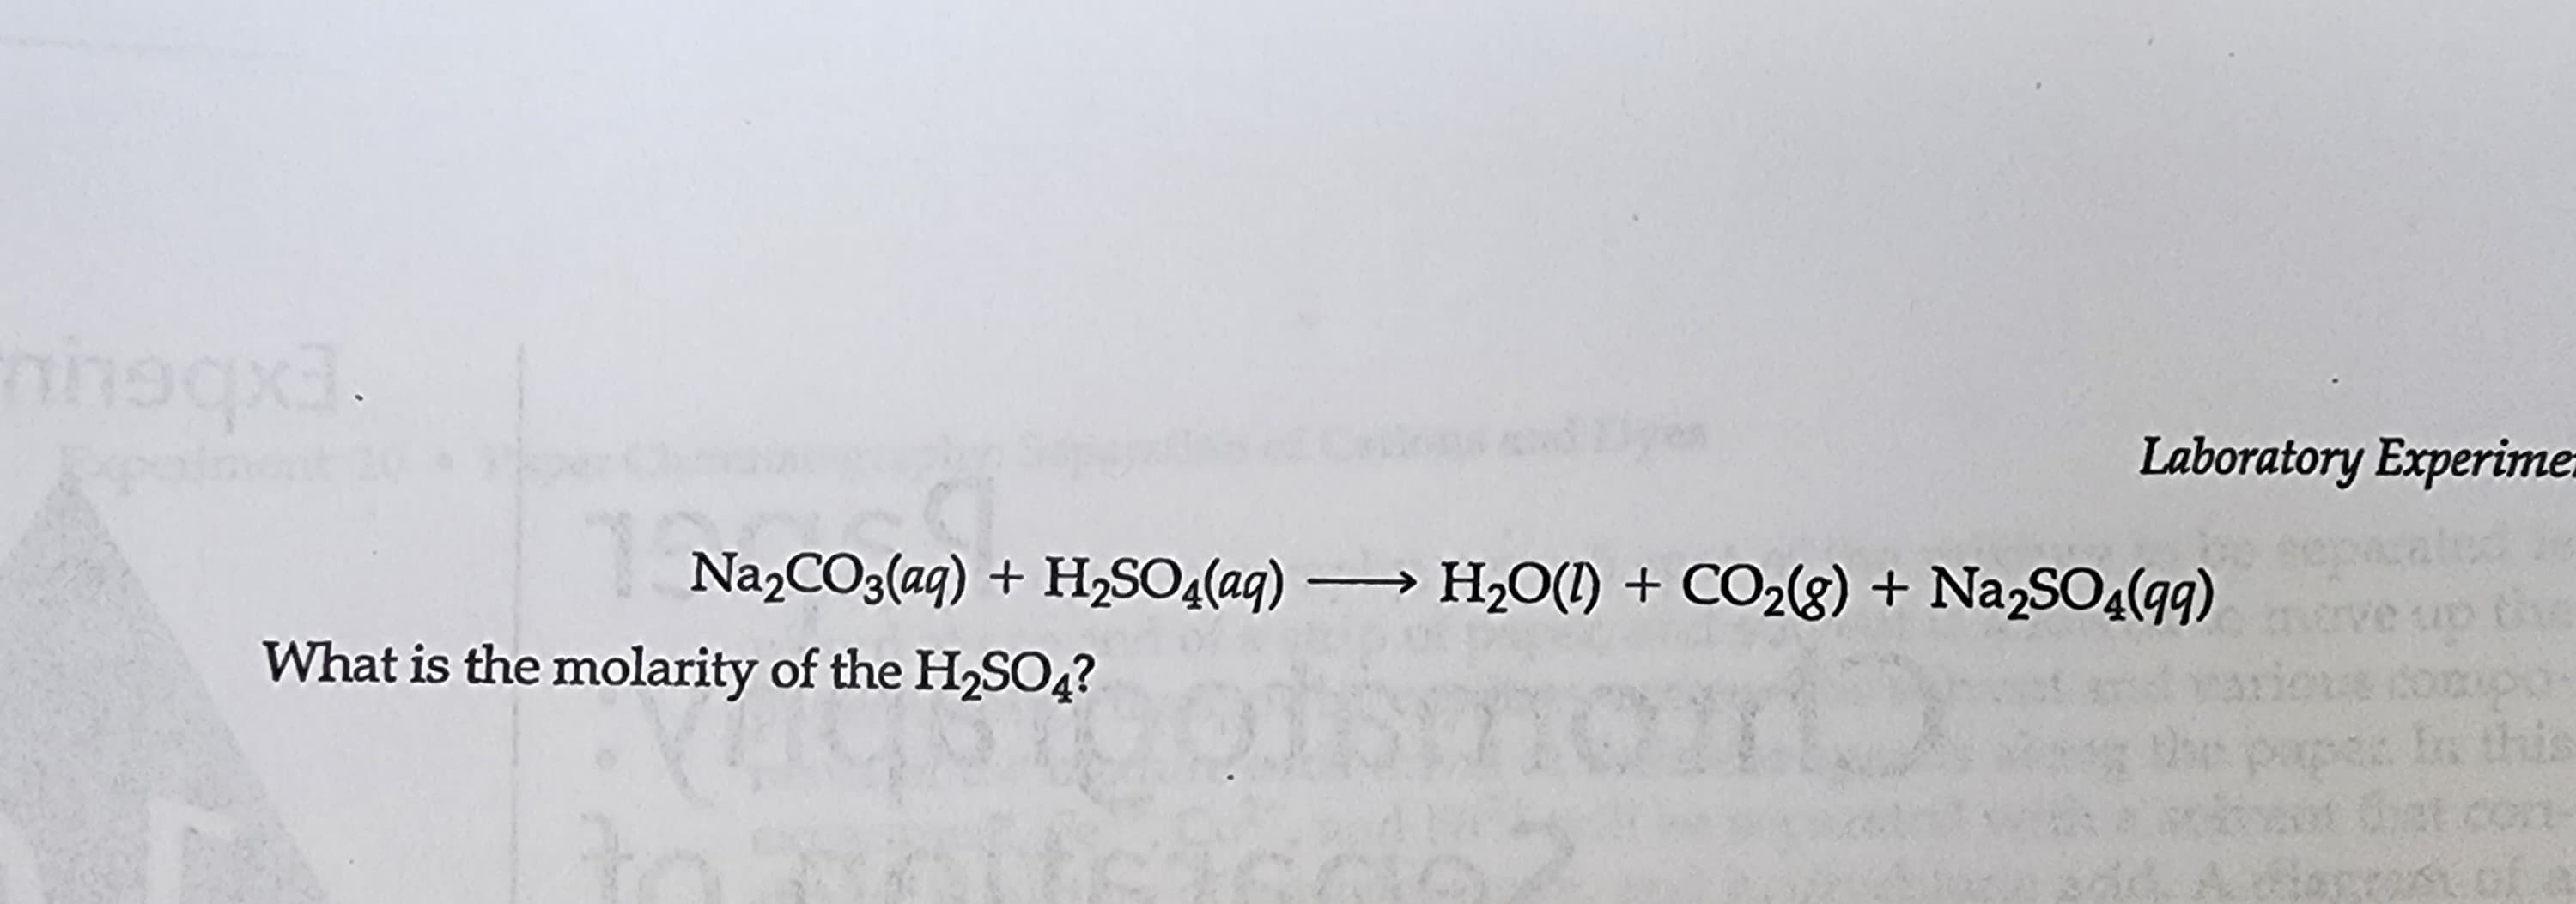 nh9qx3.
Laboratory Experime
1
\_Na₂CO3(aq) + H₂SO4(aq) →→→ H₂O(1) + CO₂(g) + Na2SO4(99)
What is the molarity of the H₂SO4?
compo